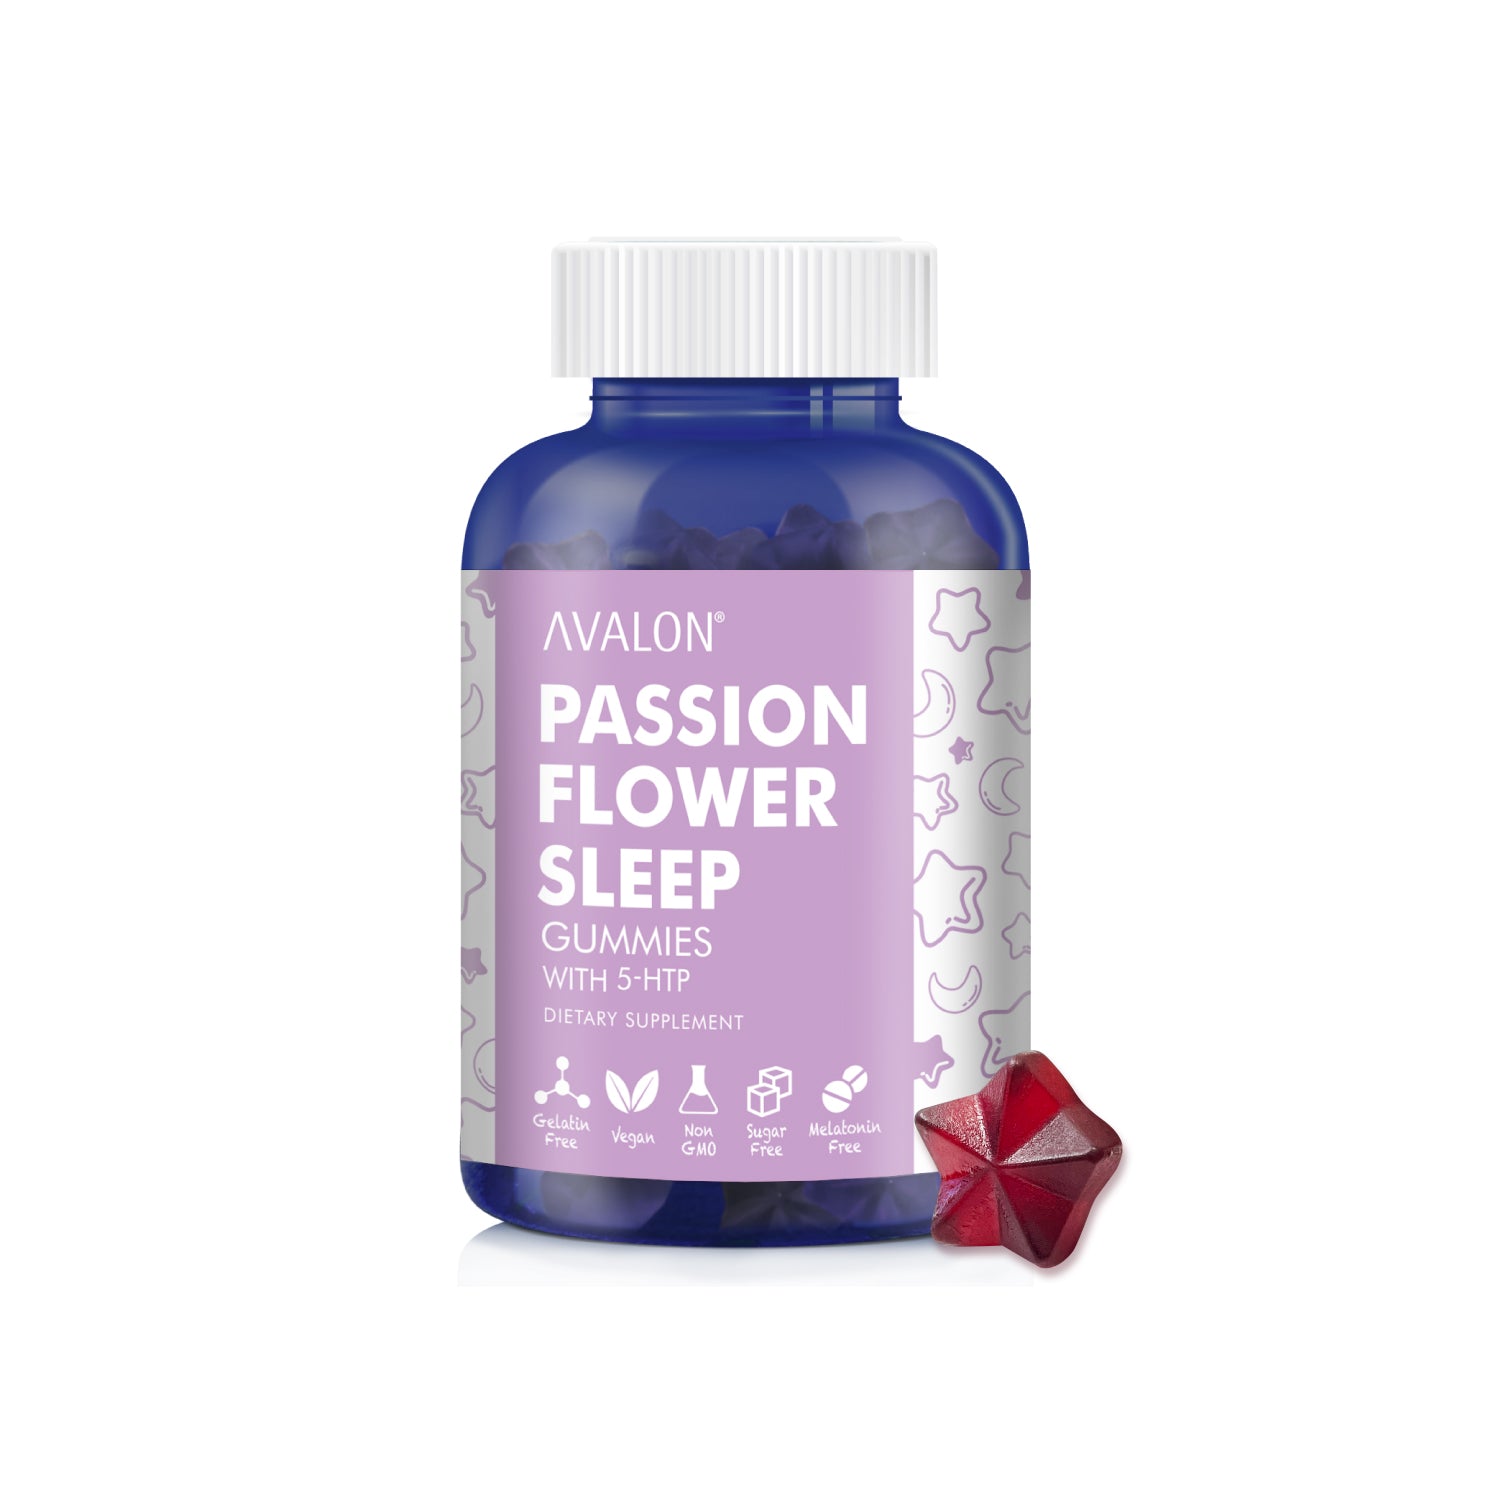 AVALON® Passion Flower Sleep Gummies, made with 5-HTP*, is a sleep-enhancing supplement designed to support your body's and brain's ability to relax for restful sleep.